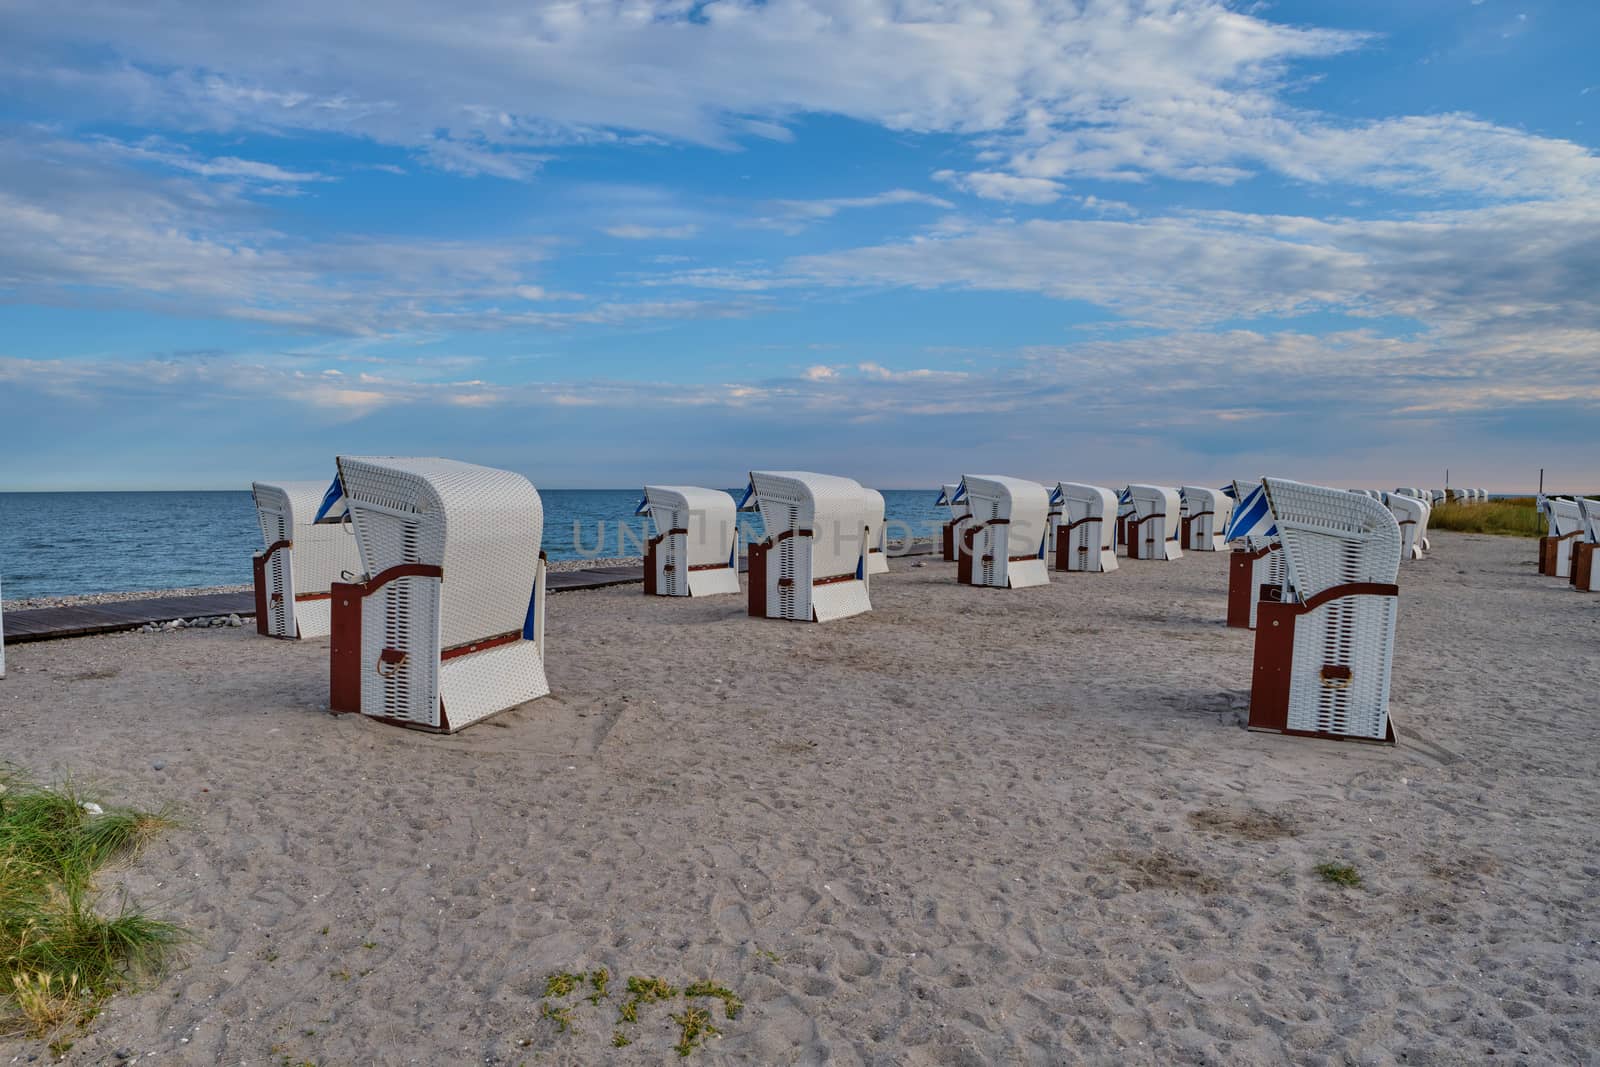 Empty beach cabins on a deserted beach at the baltic sea in the morning.